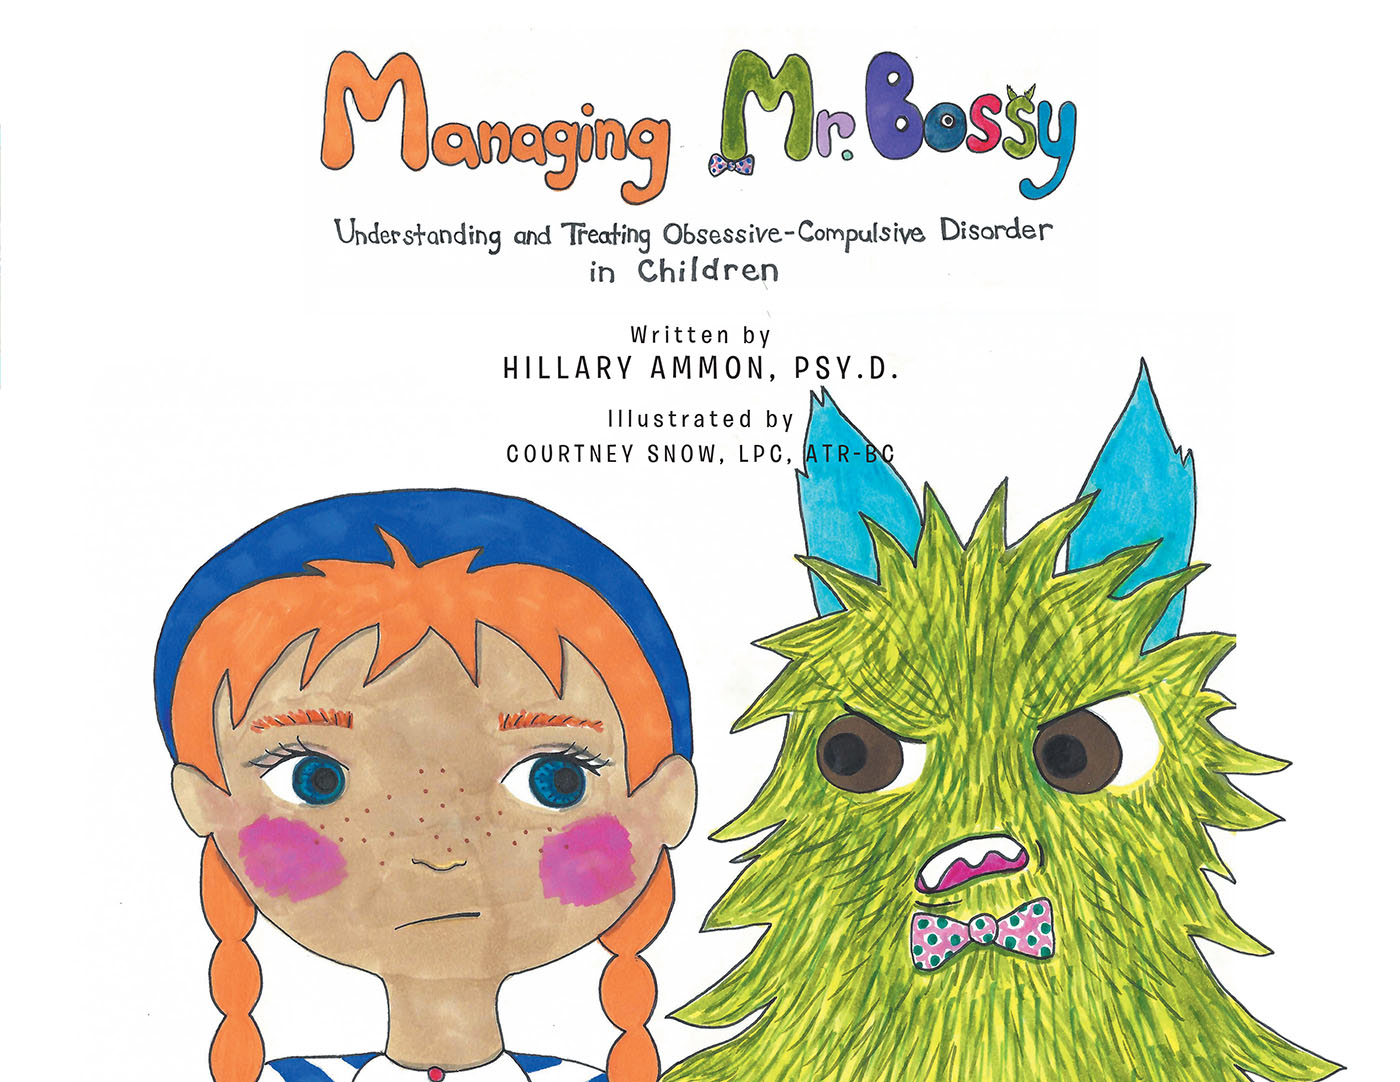 Hillary Ammon, Psy.D.’s New Book, “Managing Mr. Bossy," is an Insightful Tale That Follows a Little Girl Who Learns to Fight Back Against the Worry Monster in Her Head